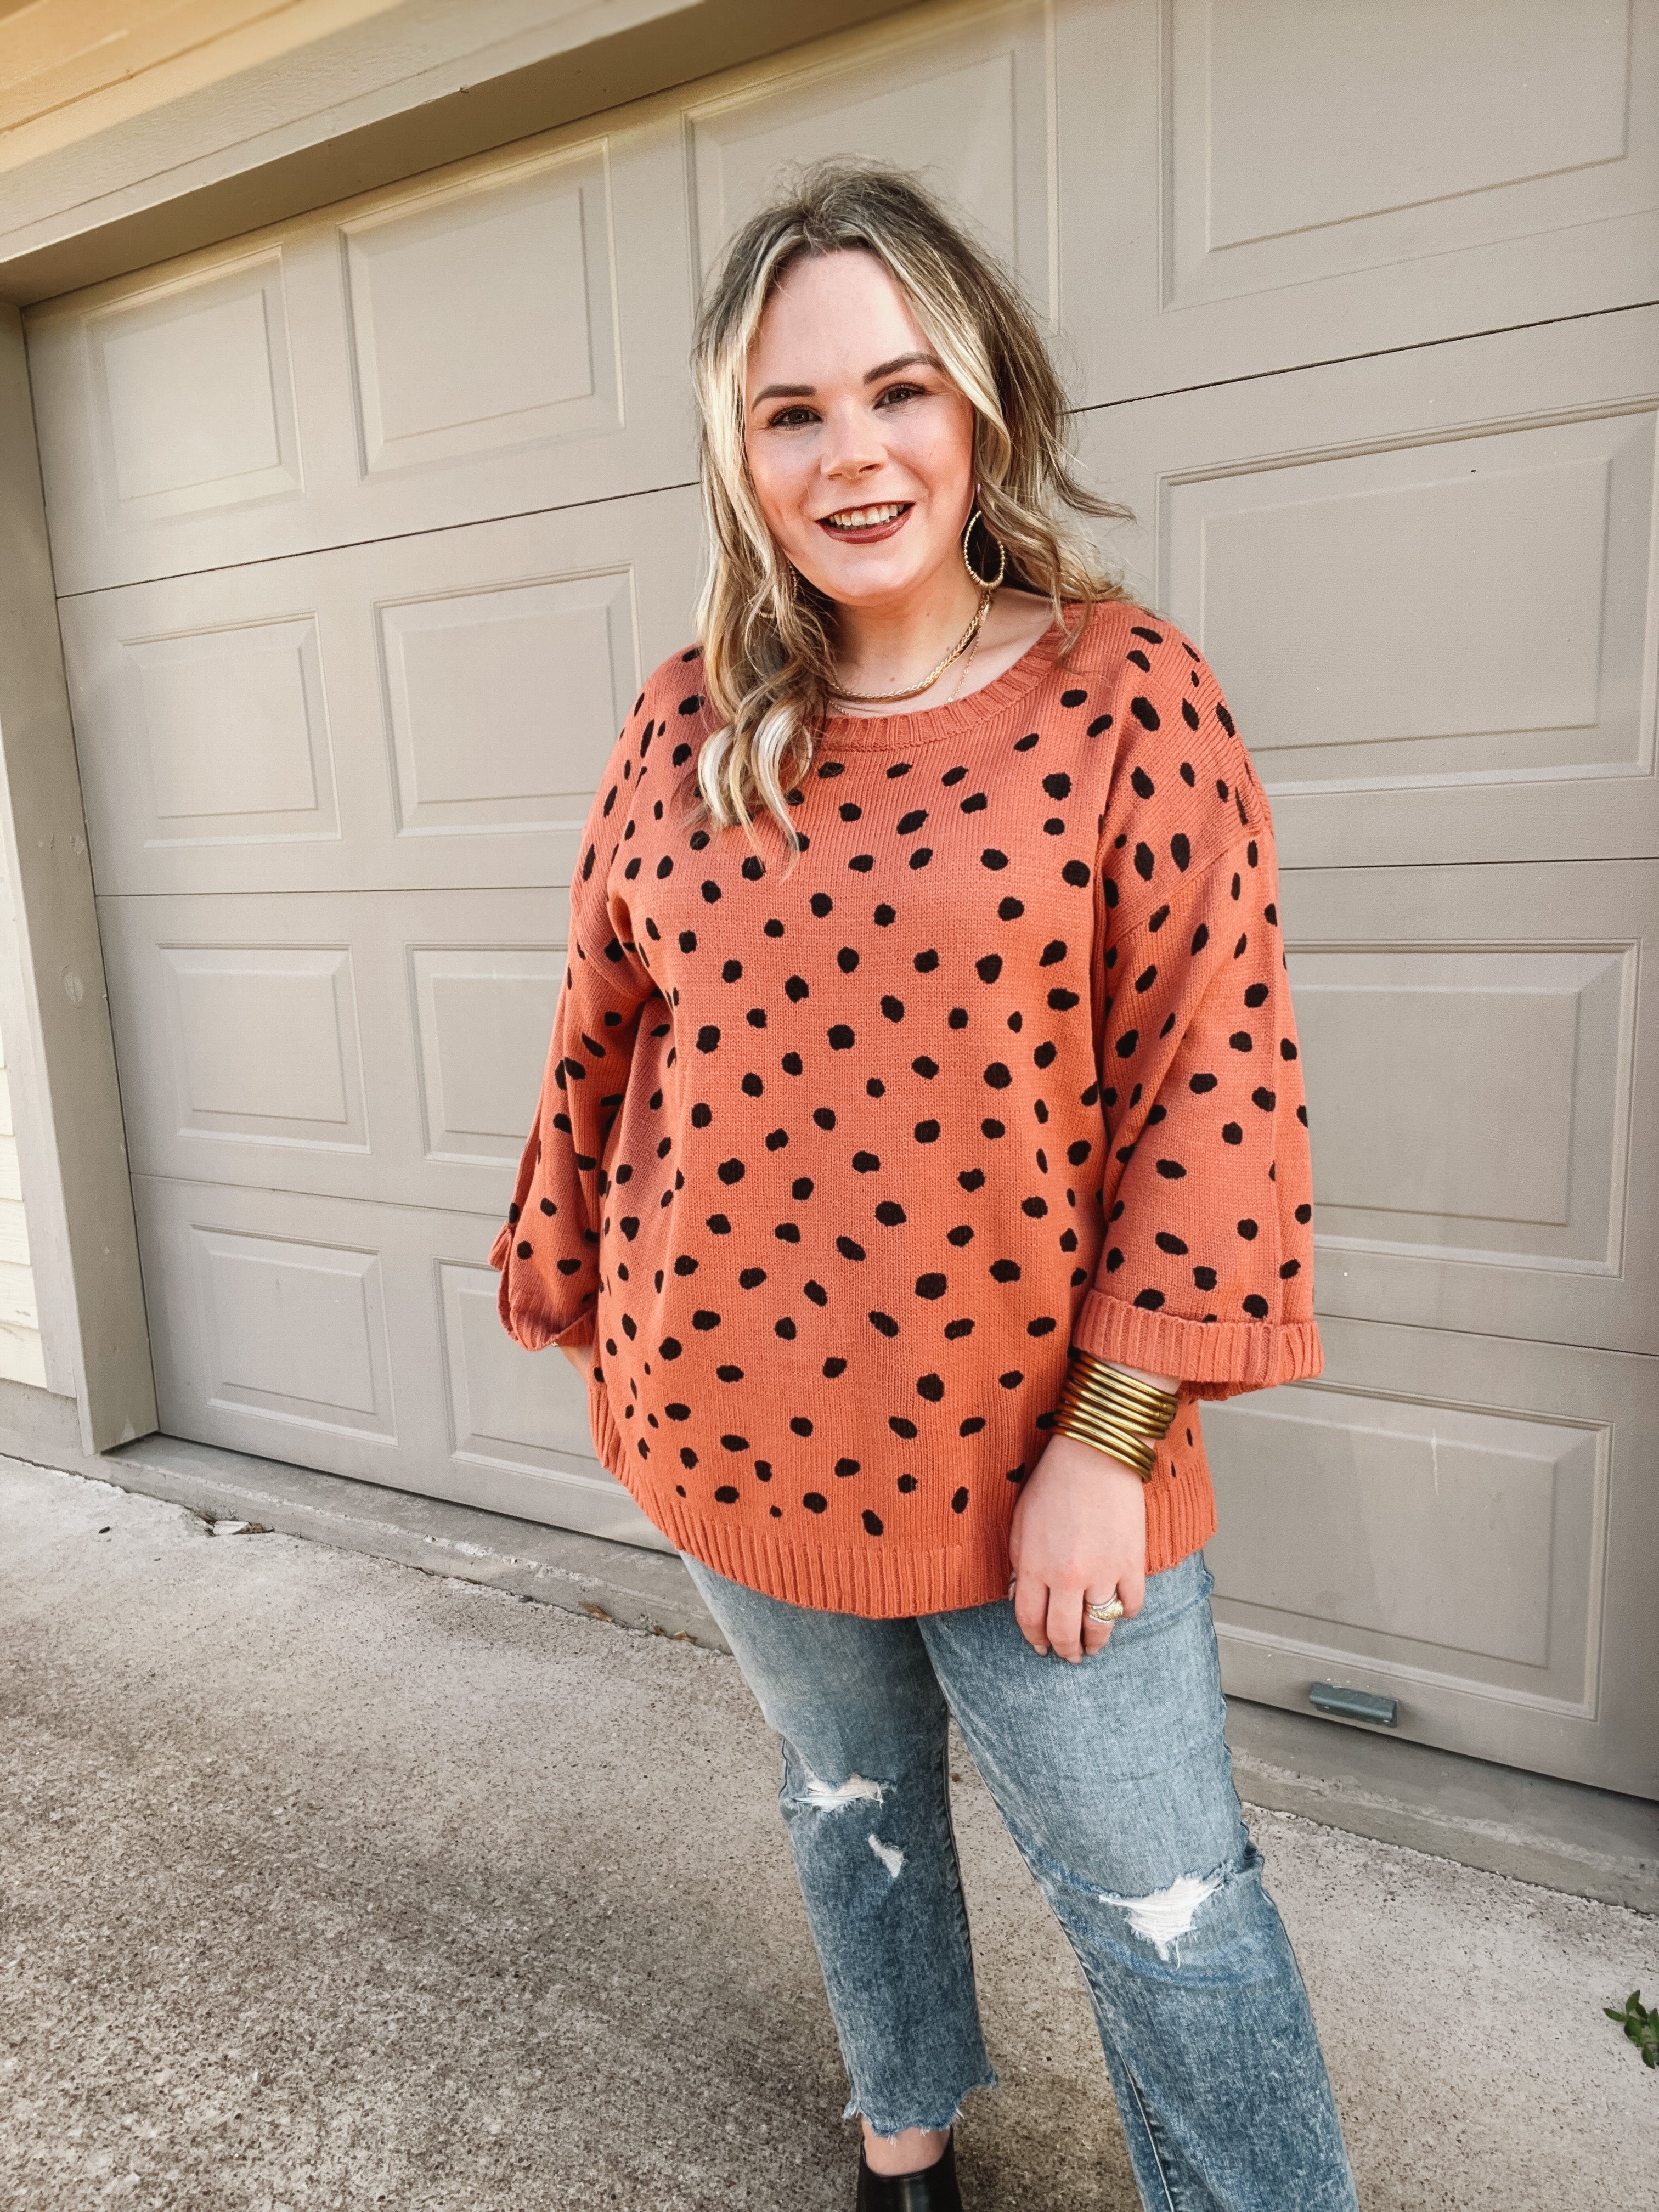 Iced Latte Love Wide 3/4 Sleeve Polka Dot Sweater in Clay Orange - Giddy Up Glamour Boutique